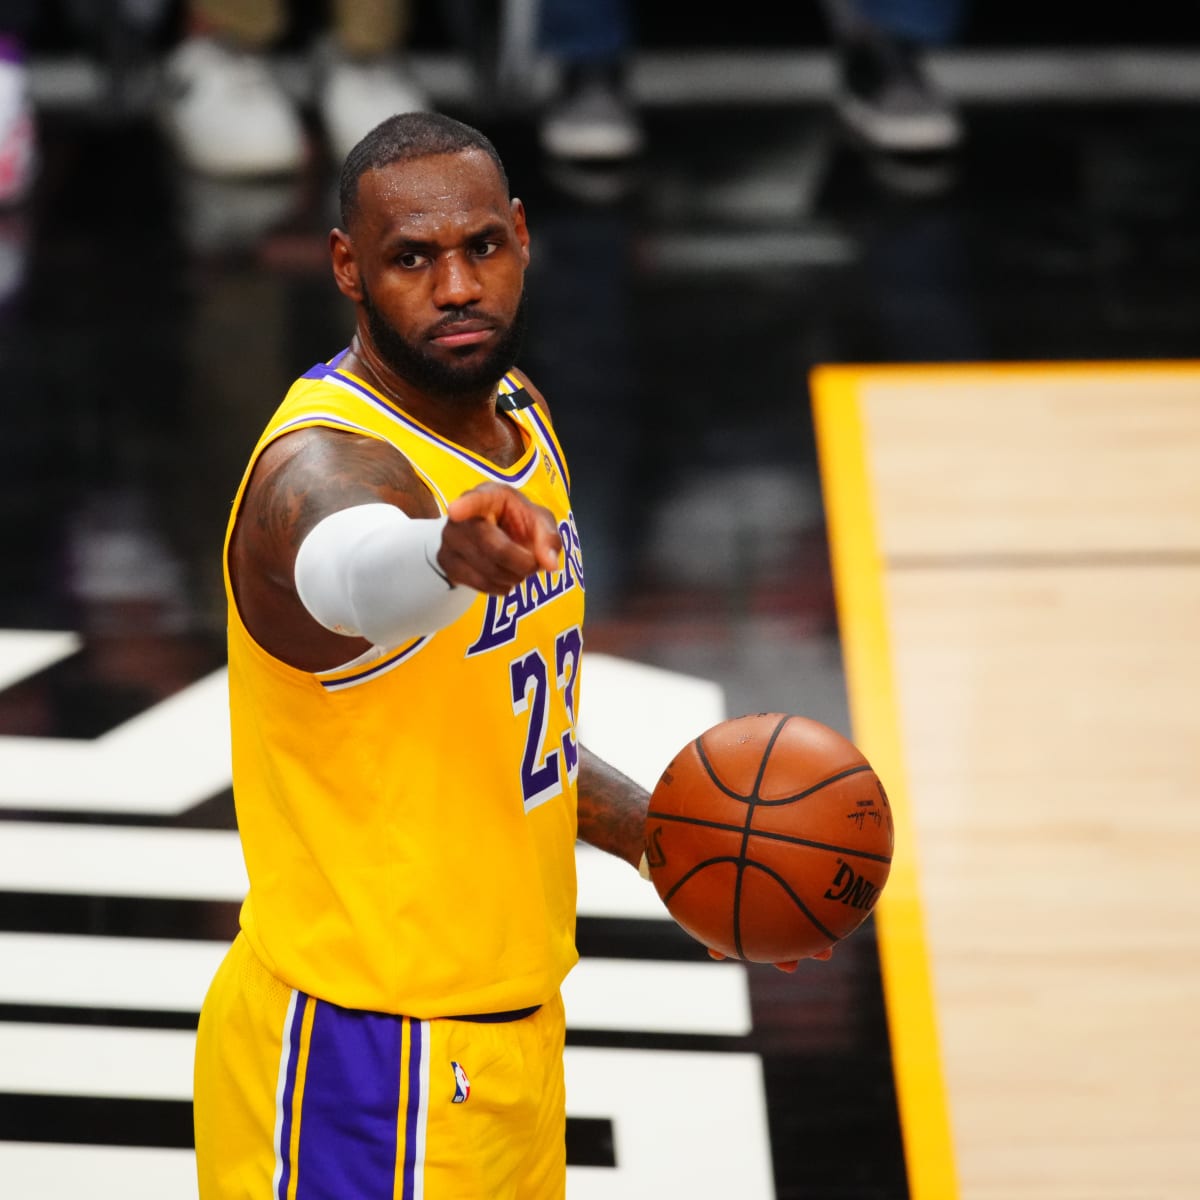 NBA 2022: Cleveland Cavaliers rise after LeBron James exit, roster